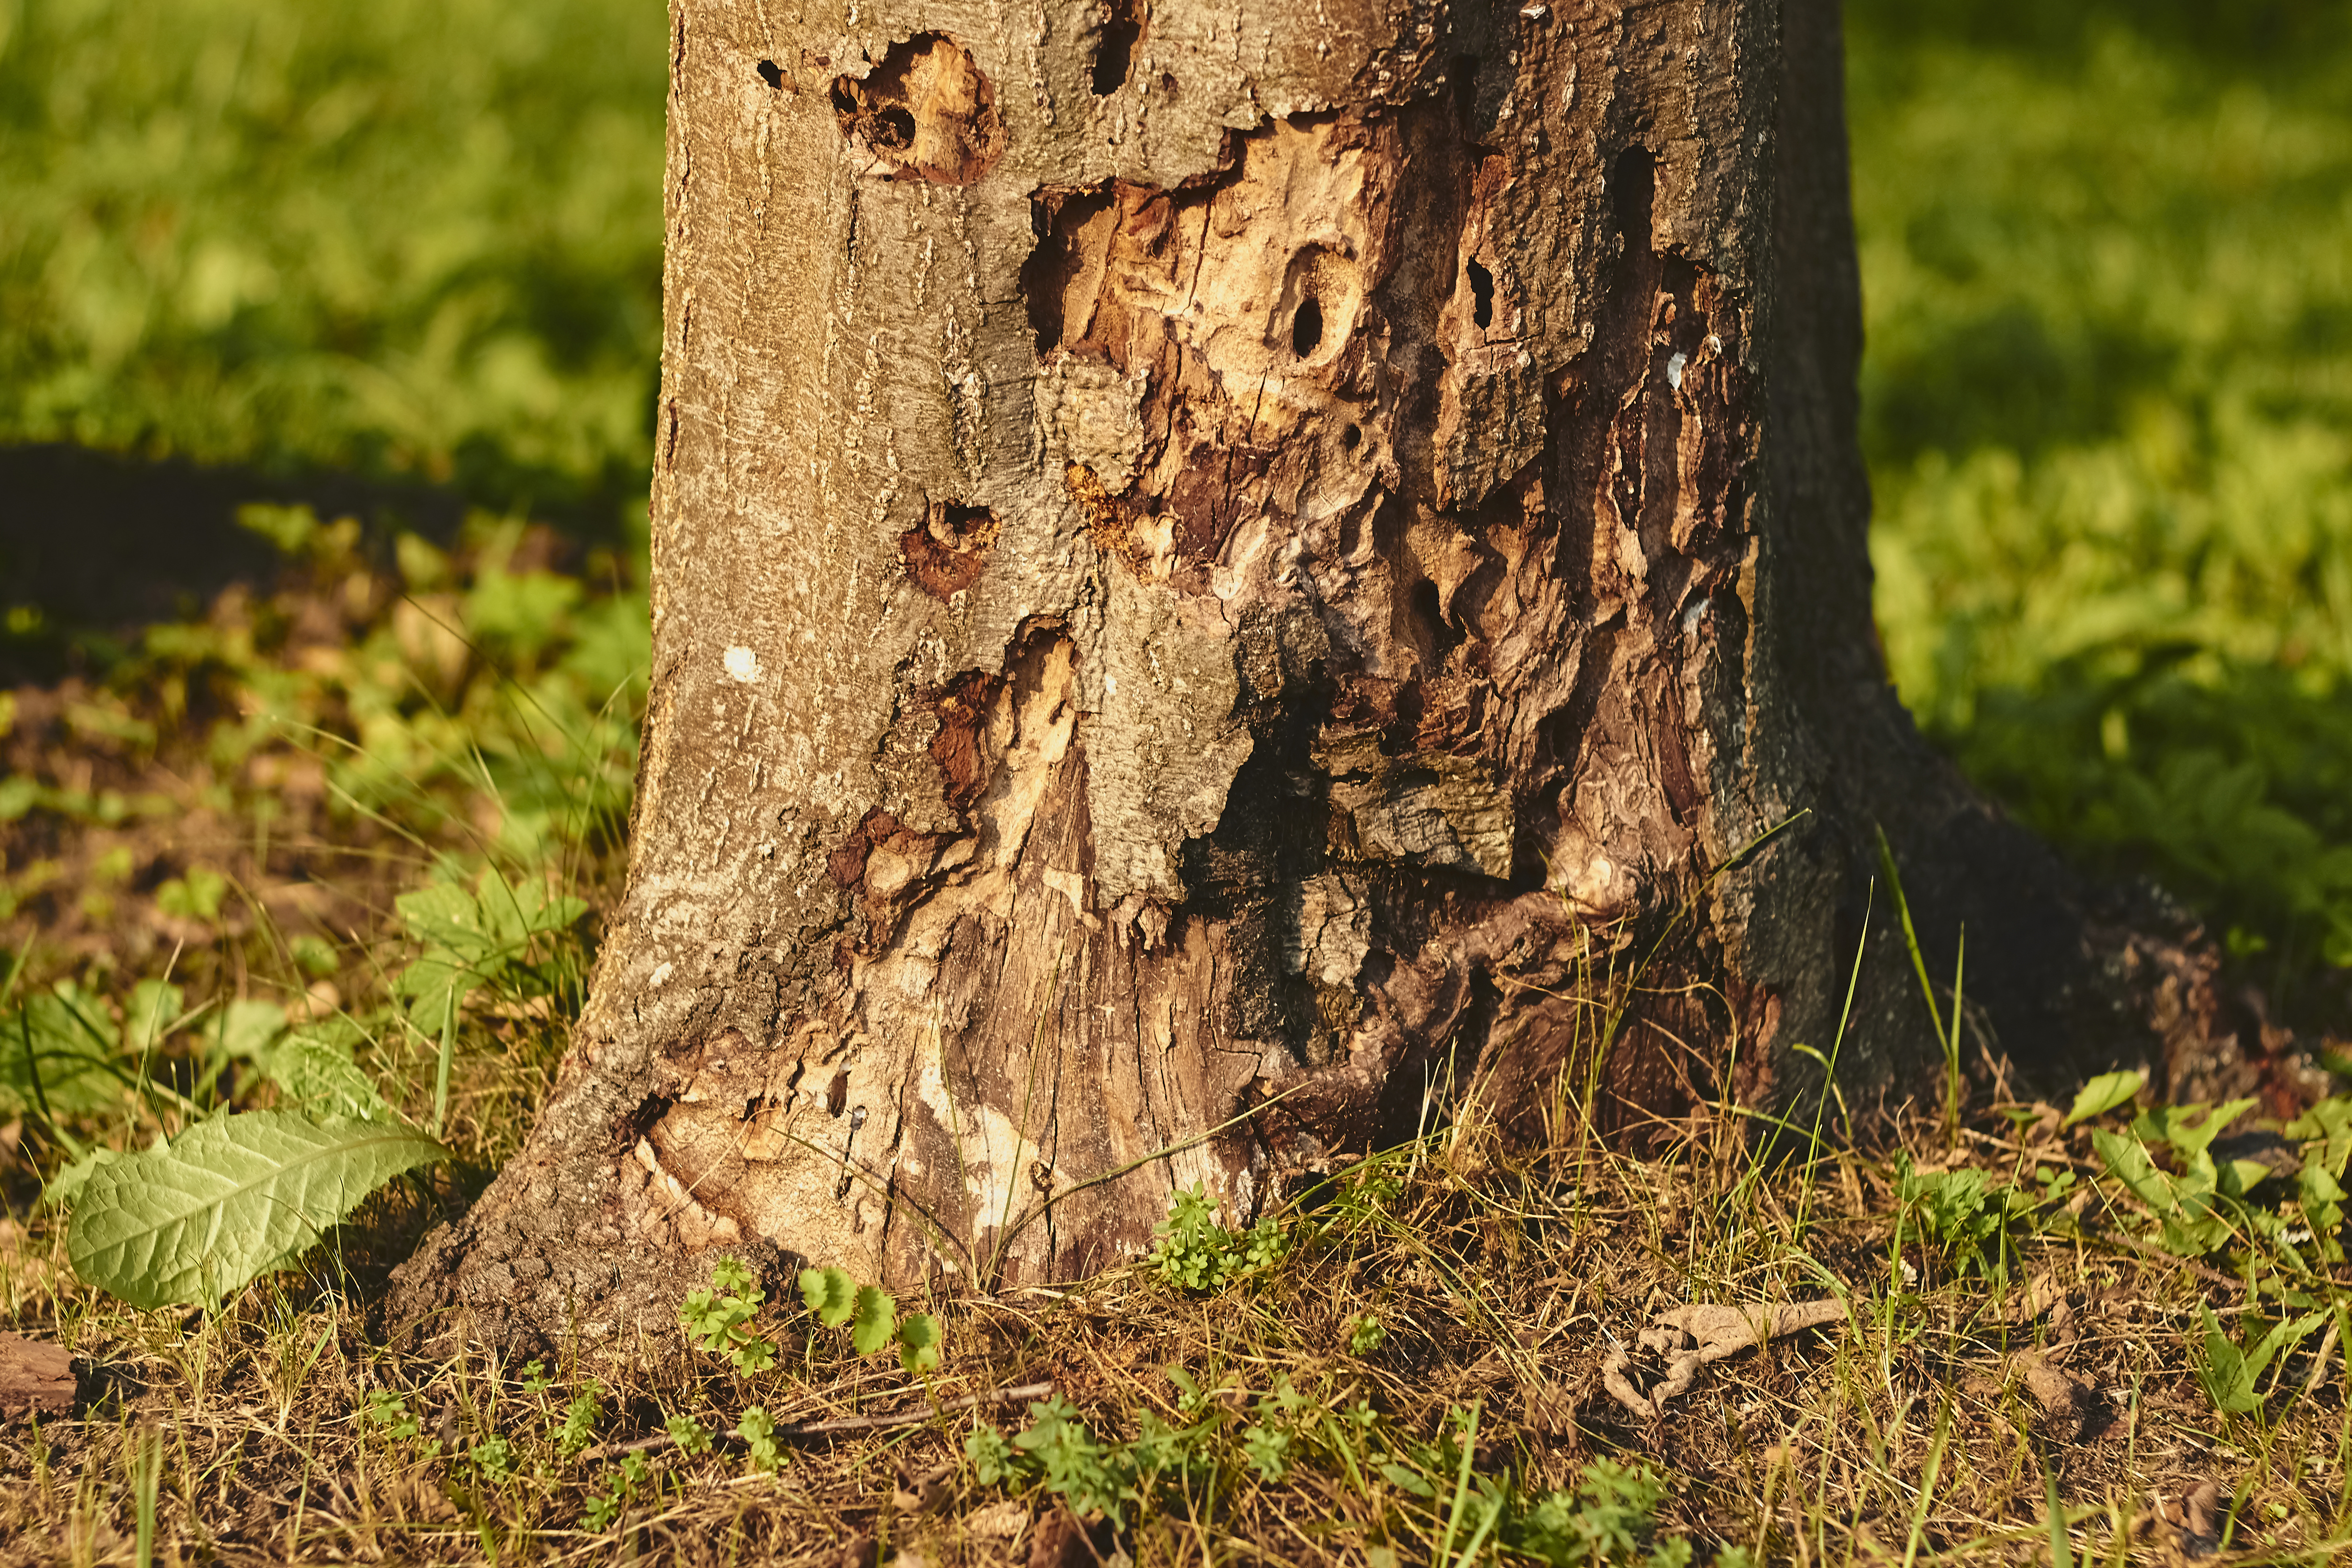 Tree damaged by termite insect pest. Carpenter ants, powderpost beetles infestation in wooden texture, background